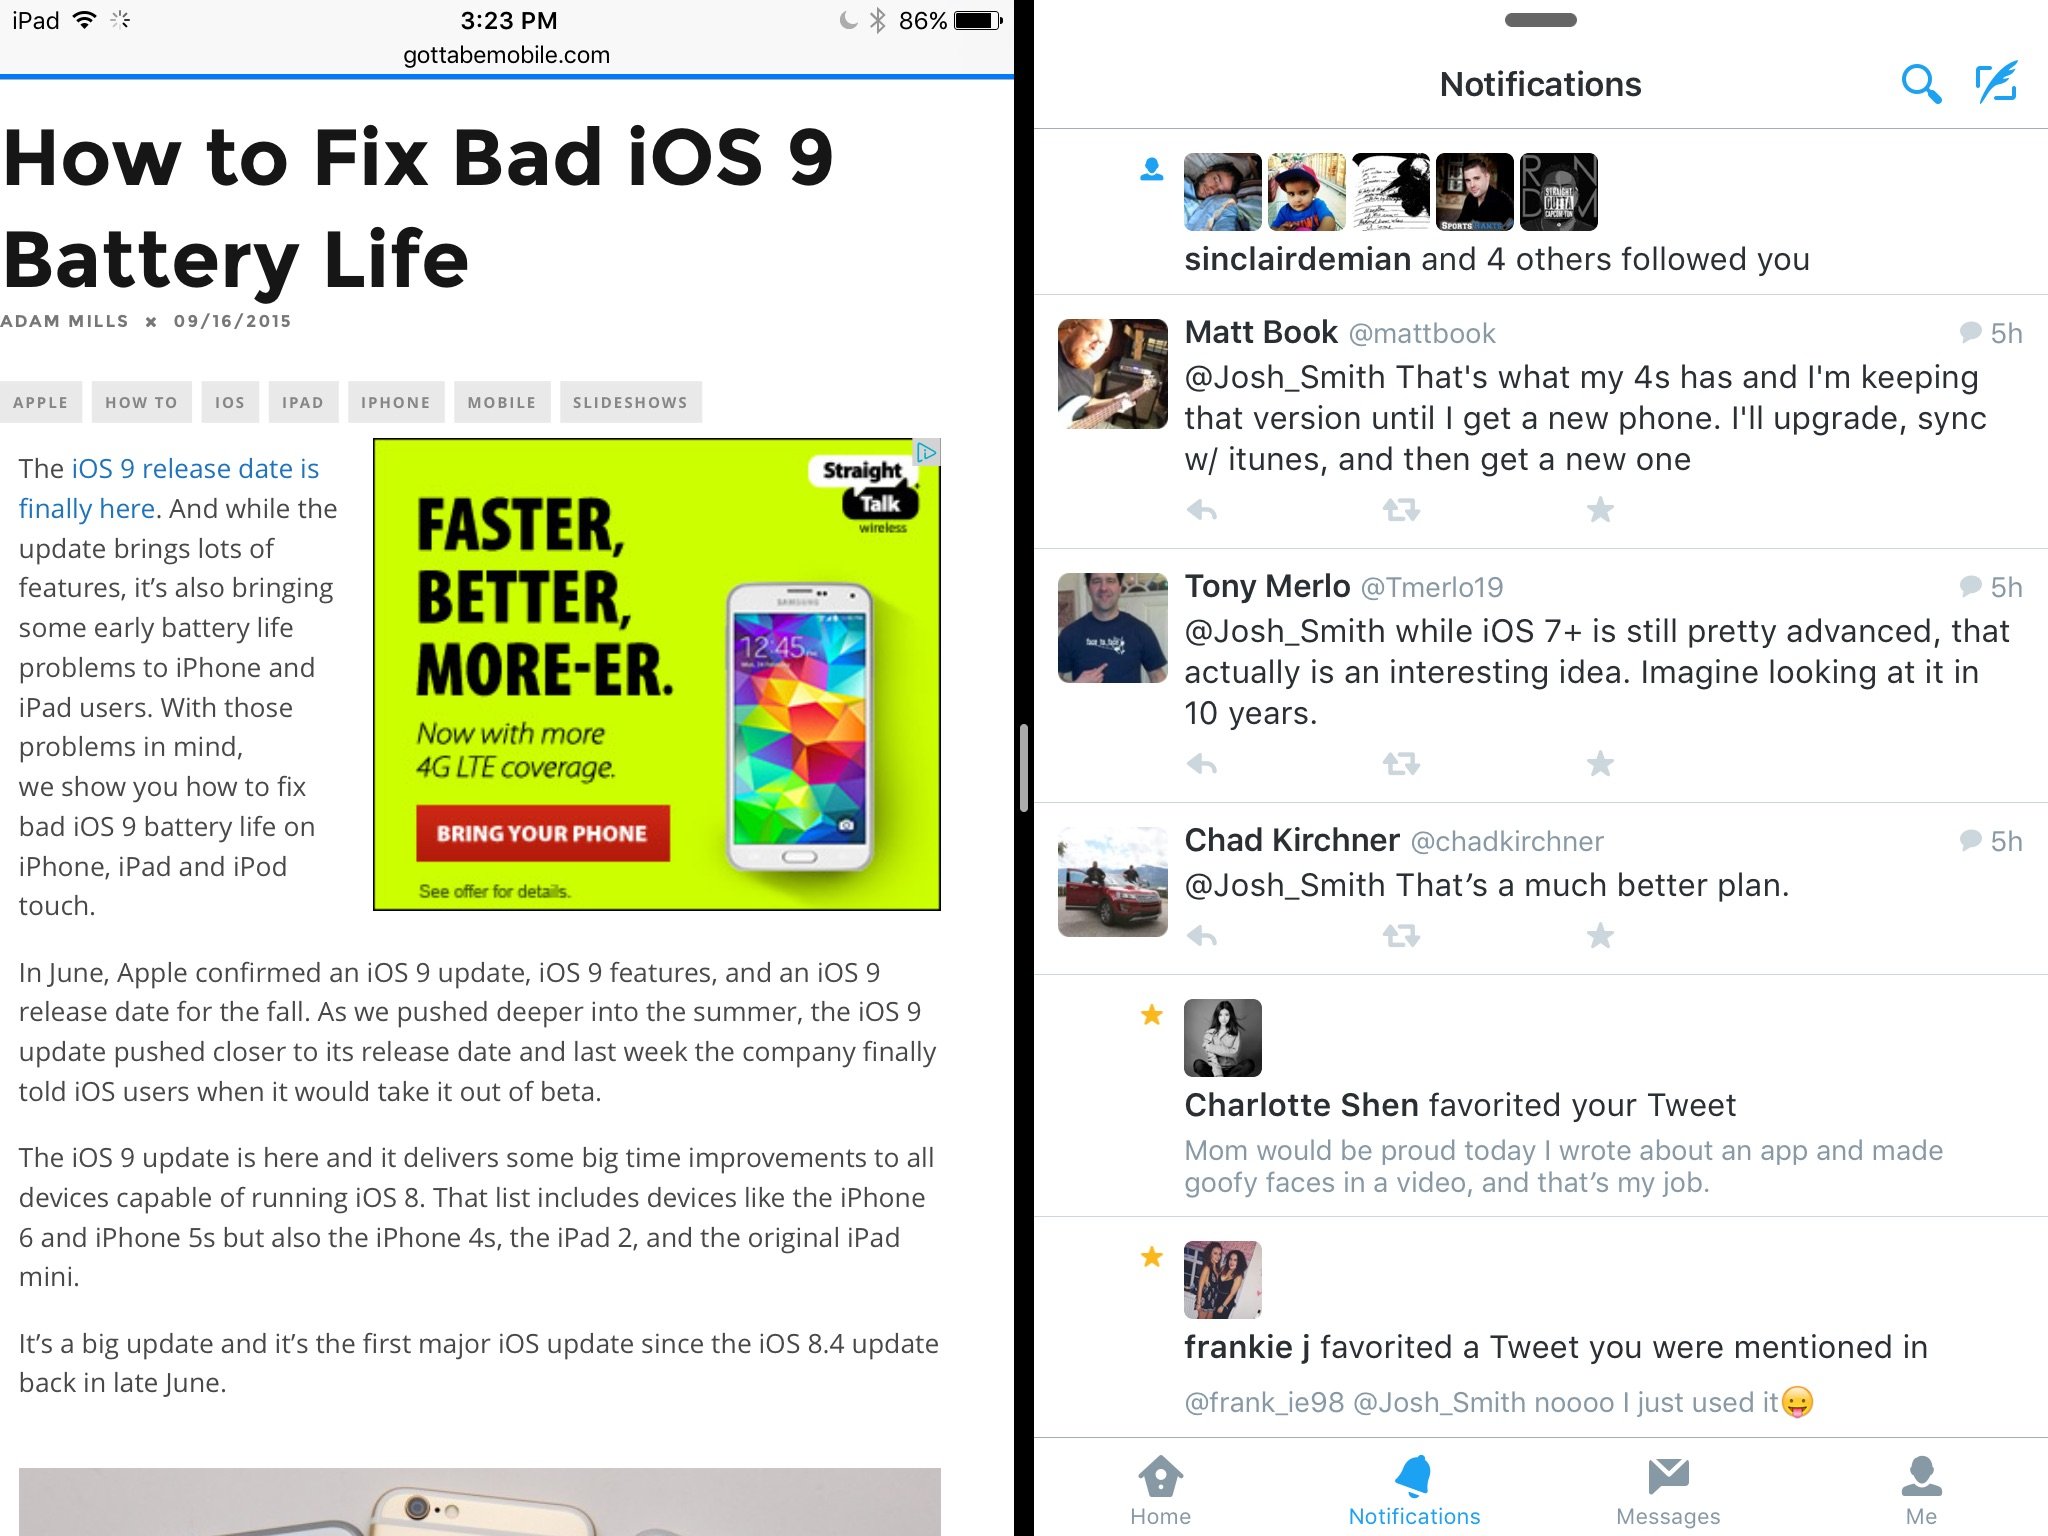 This is what the iOS 9 multitasking looks like.